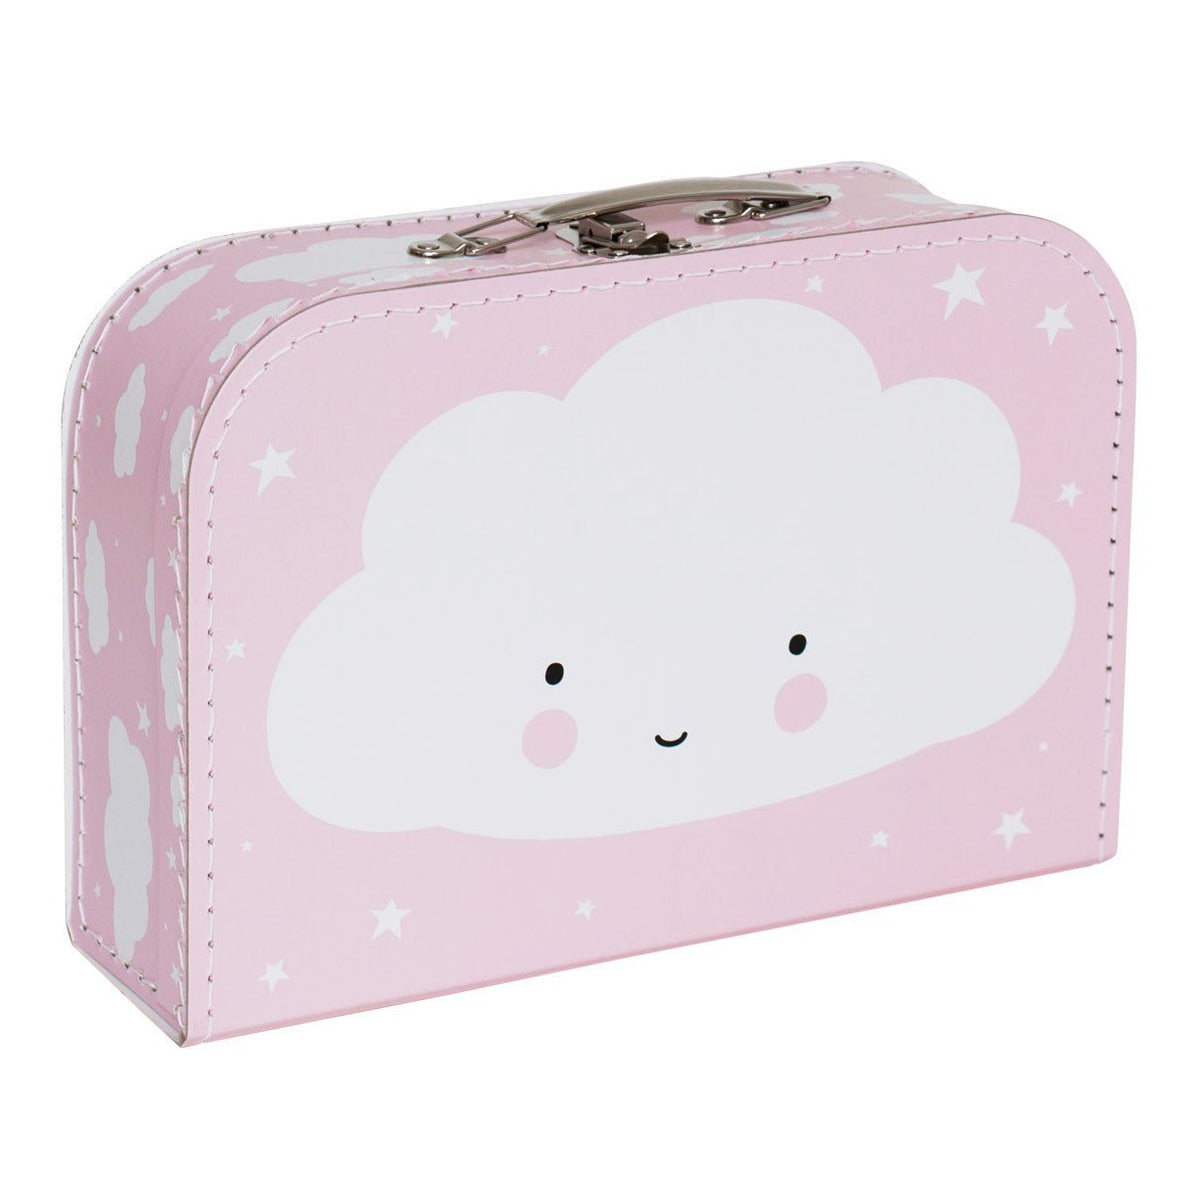 a-little-lovely-company-suitcase-cloud-pink- (1)